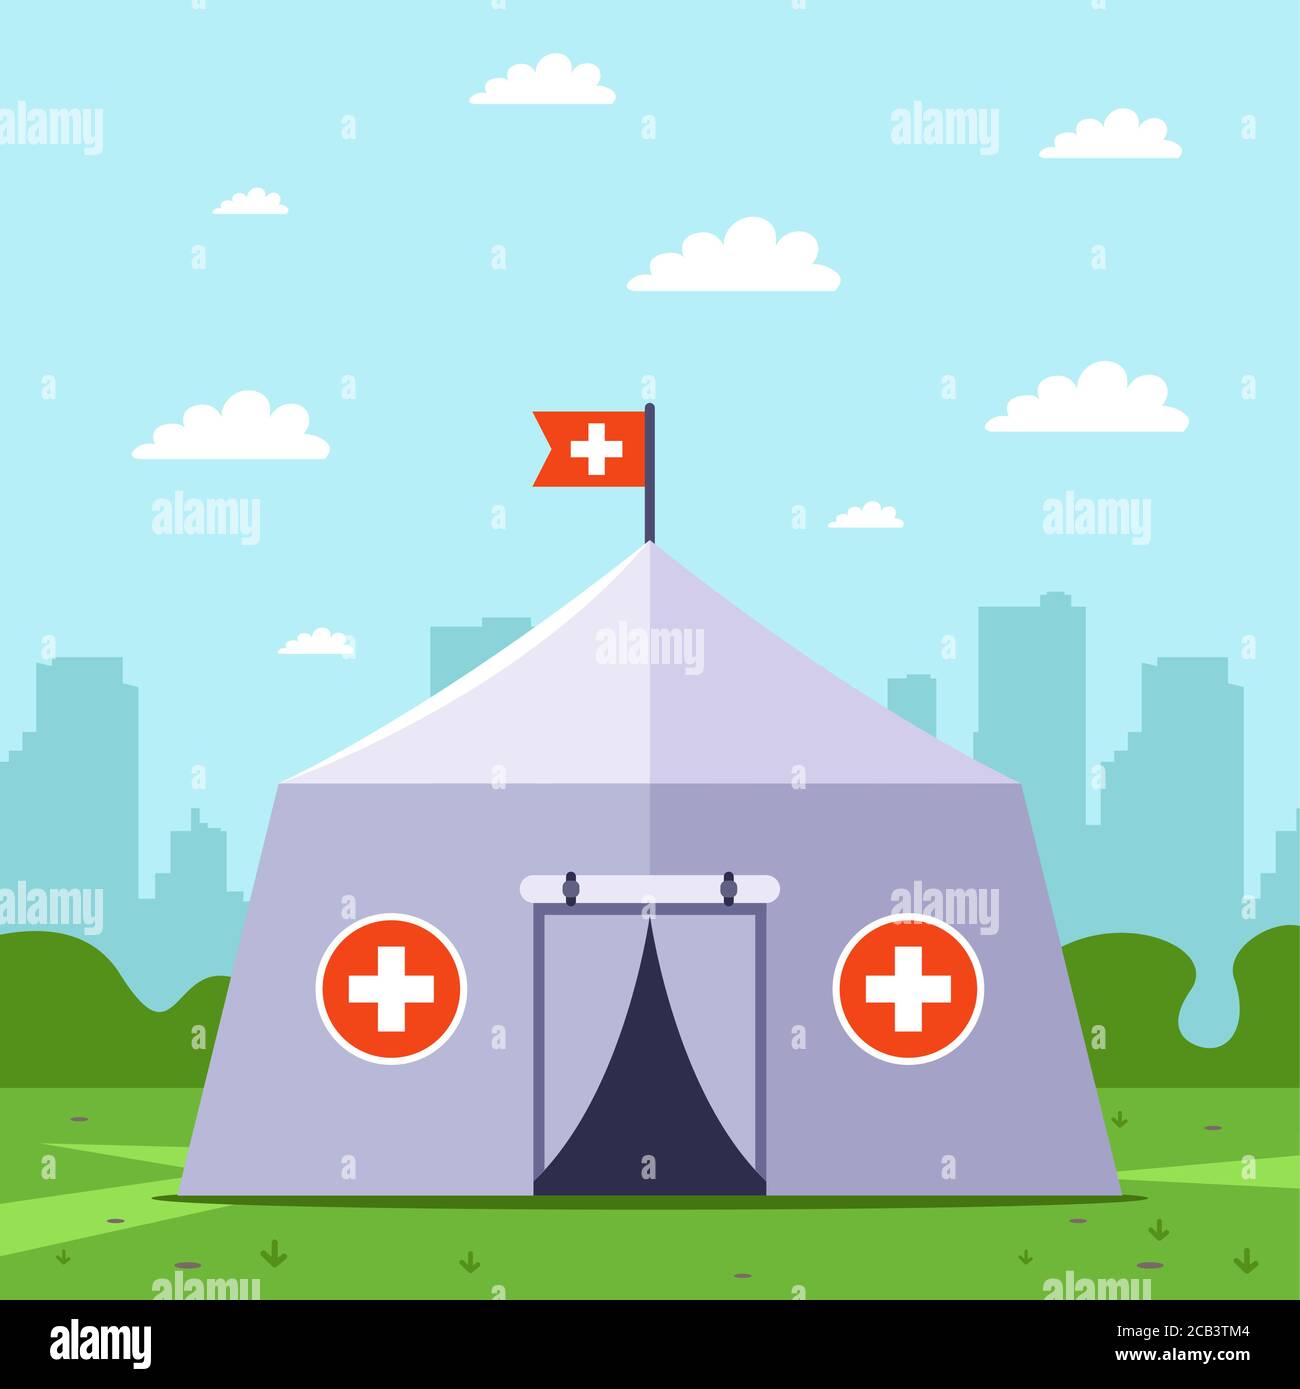 emergency medical tent. provide disaster relief. flat vector illustration. Stock Vector